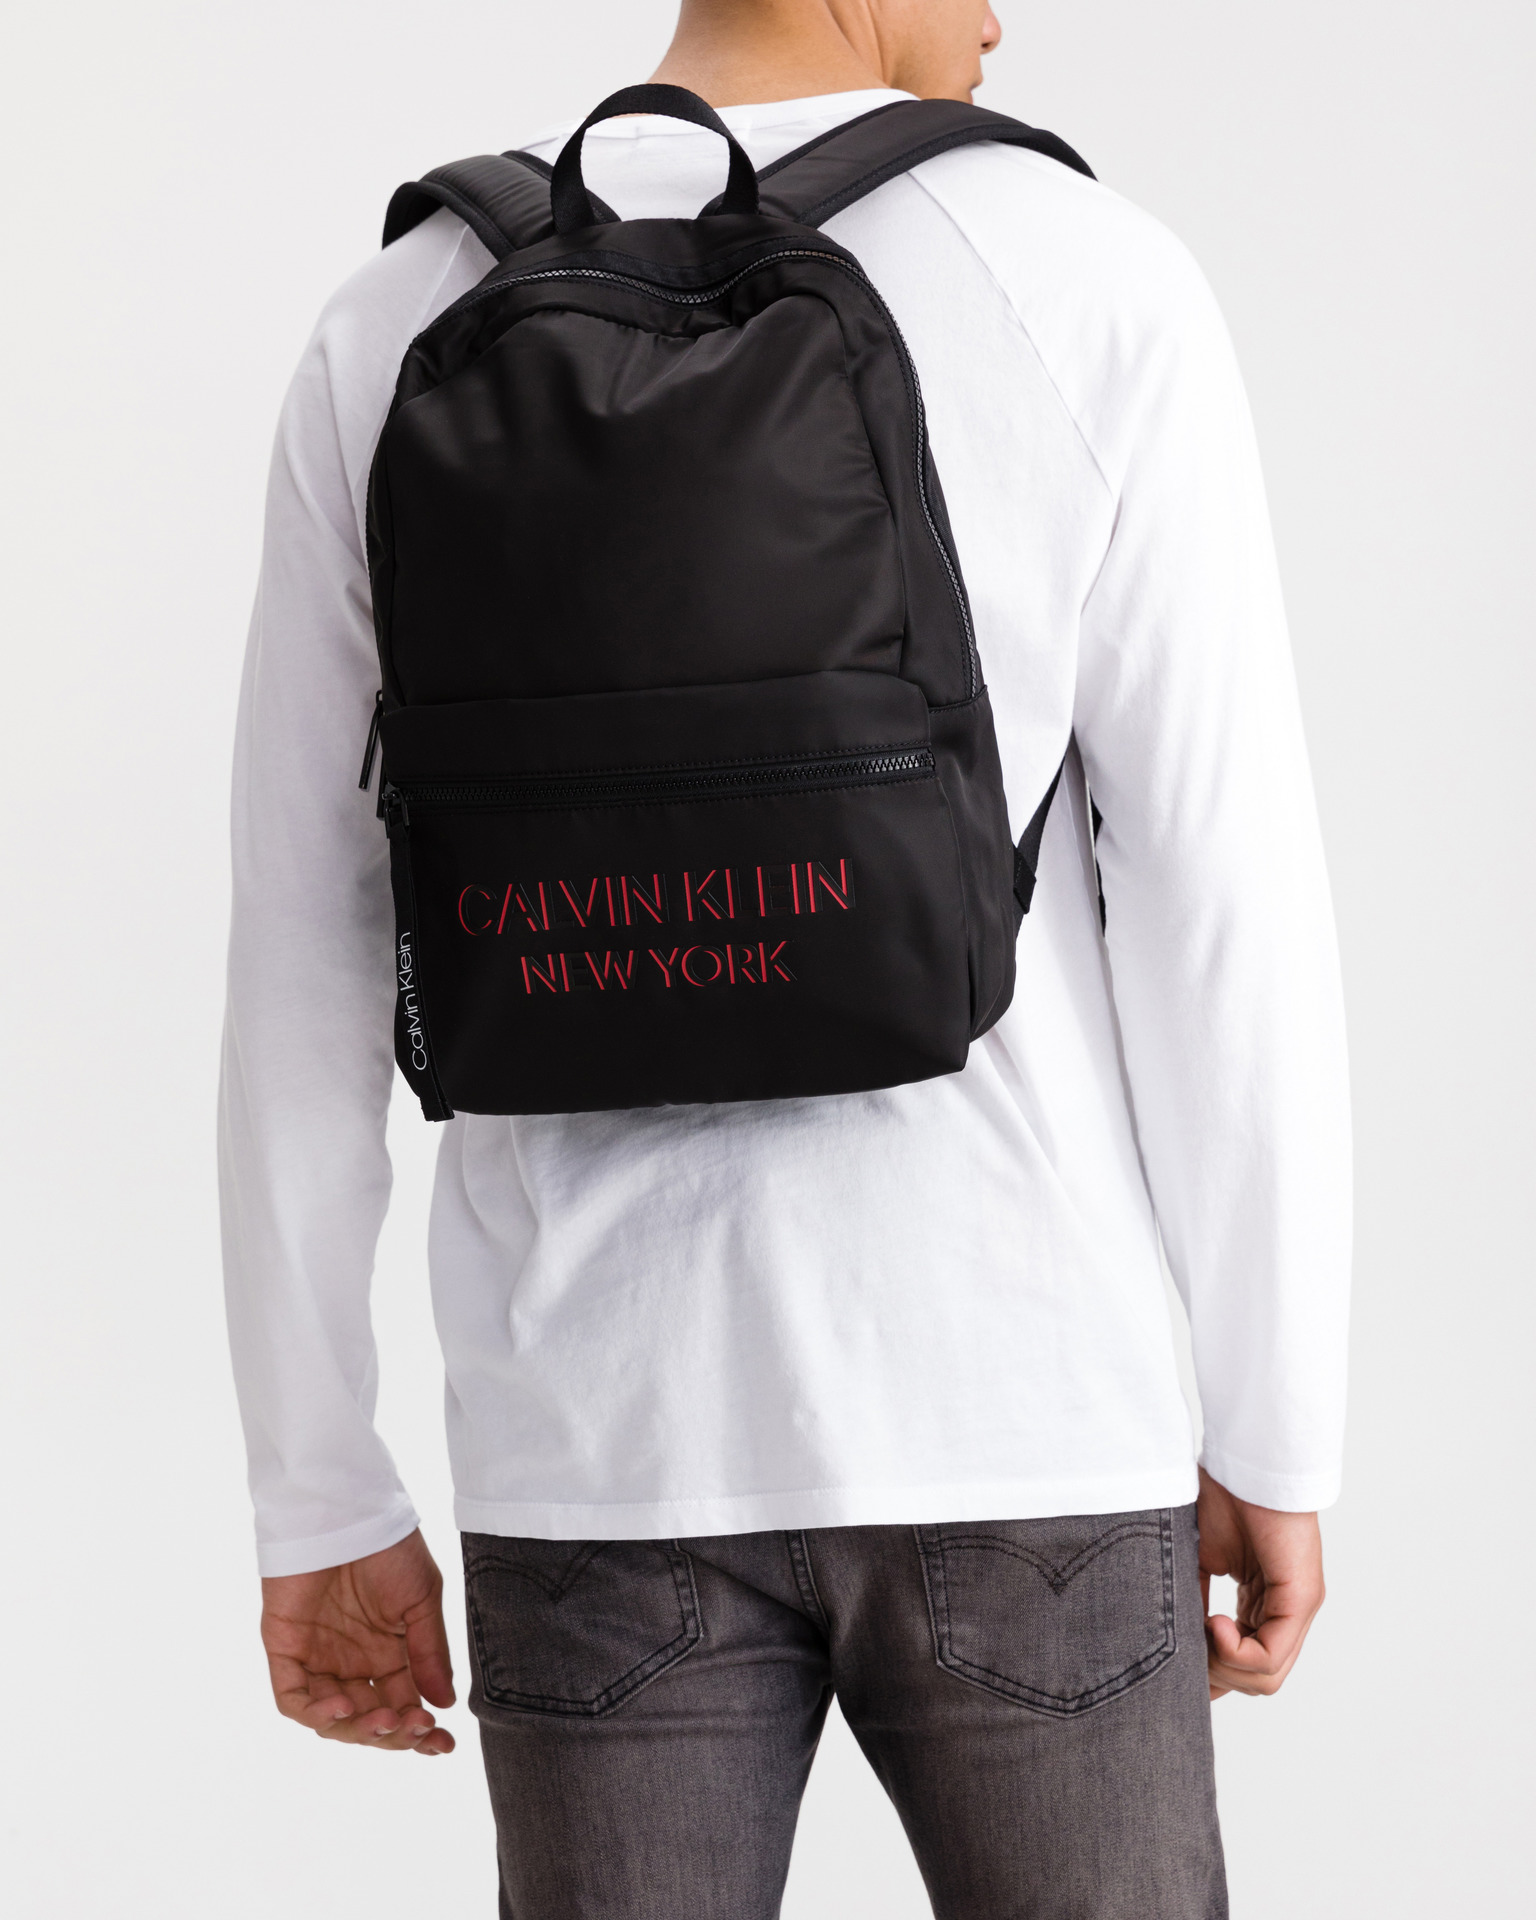 Calvin Klein - Campus NY Backpack Bibloo.com